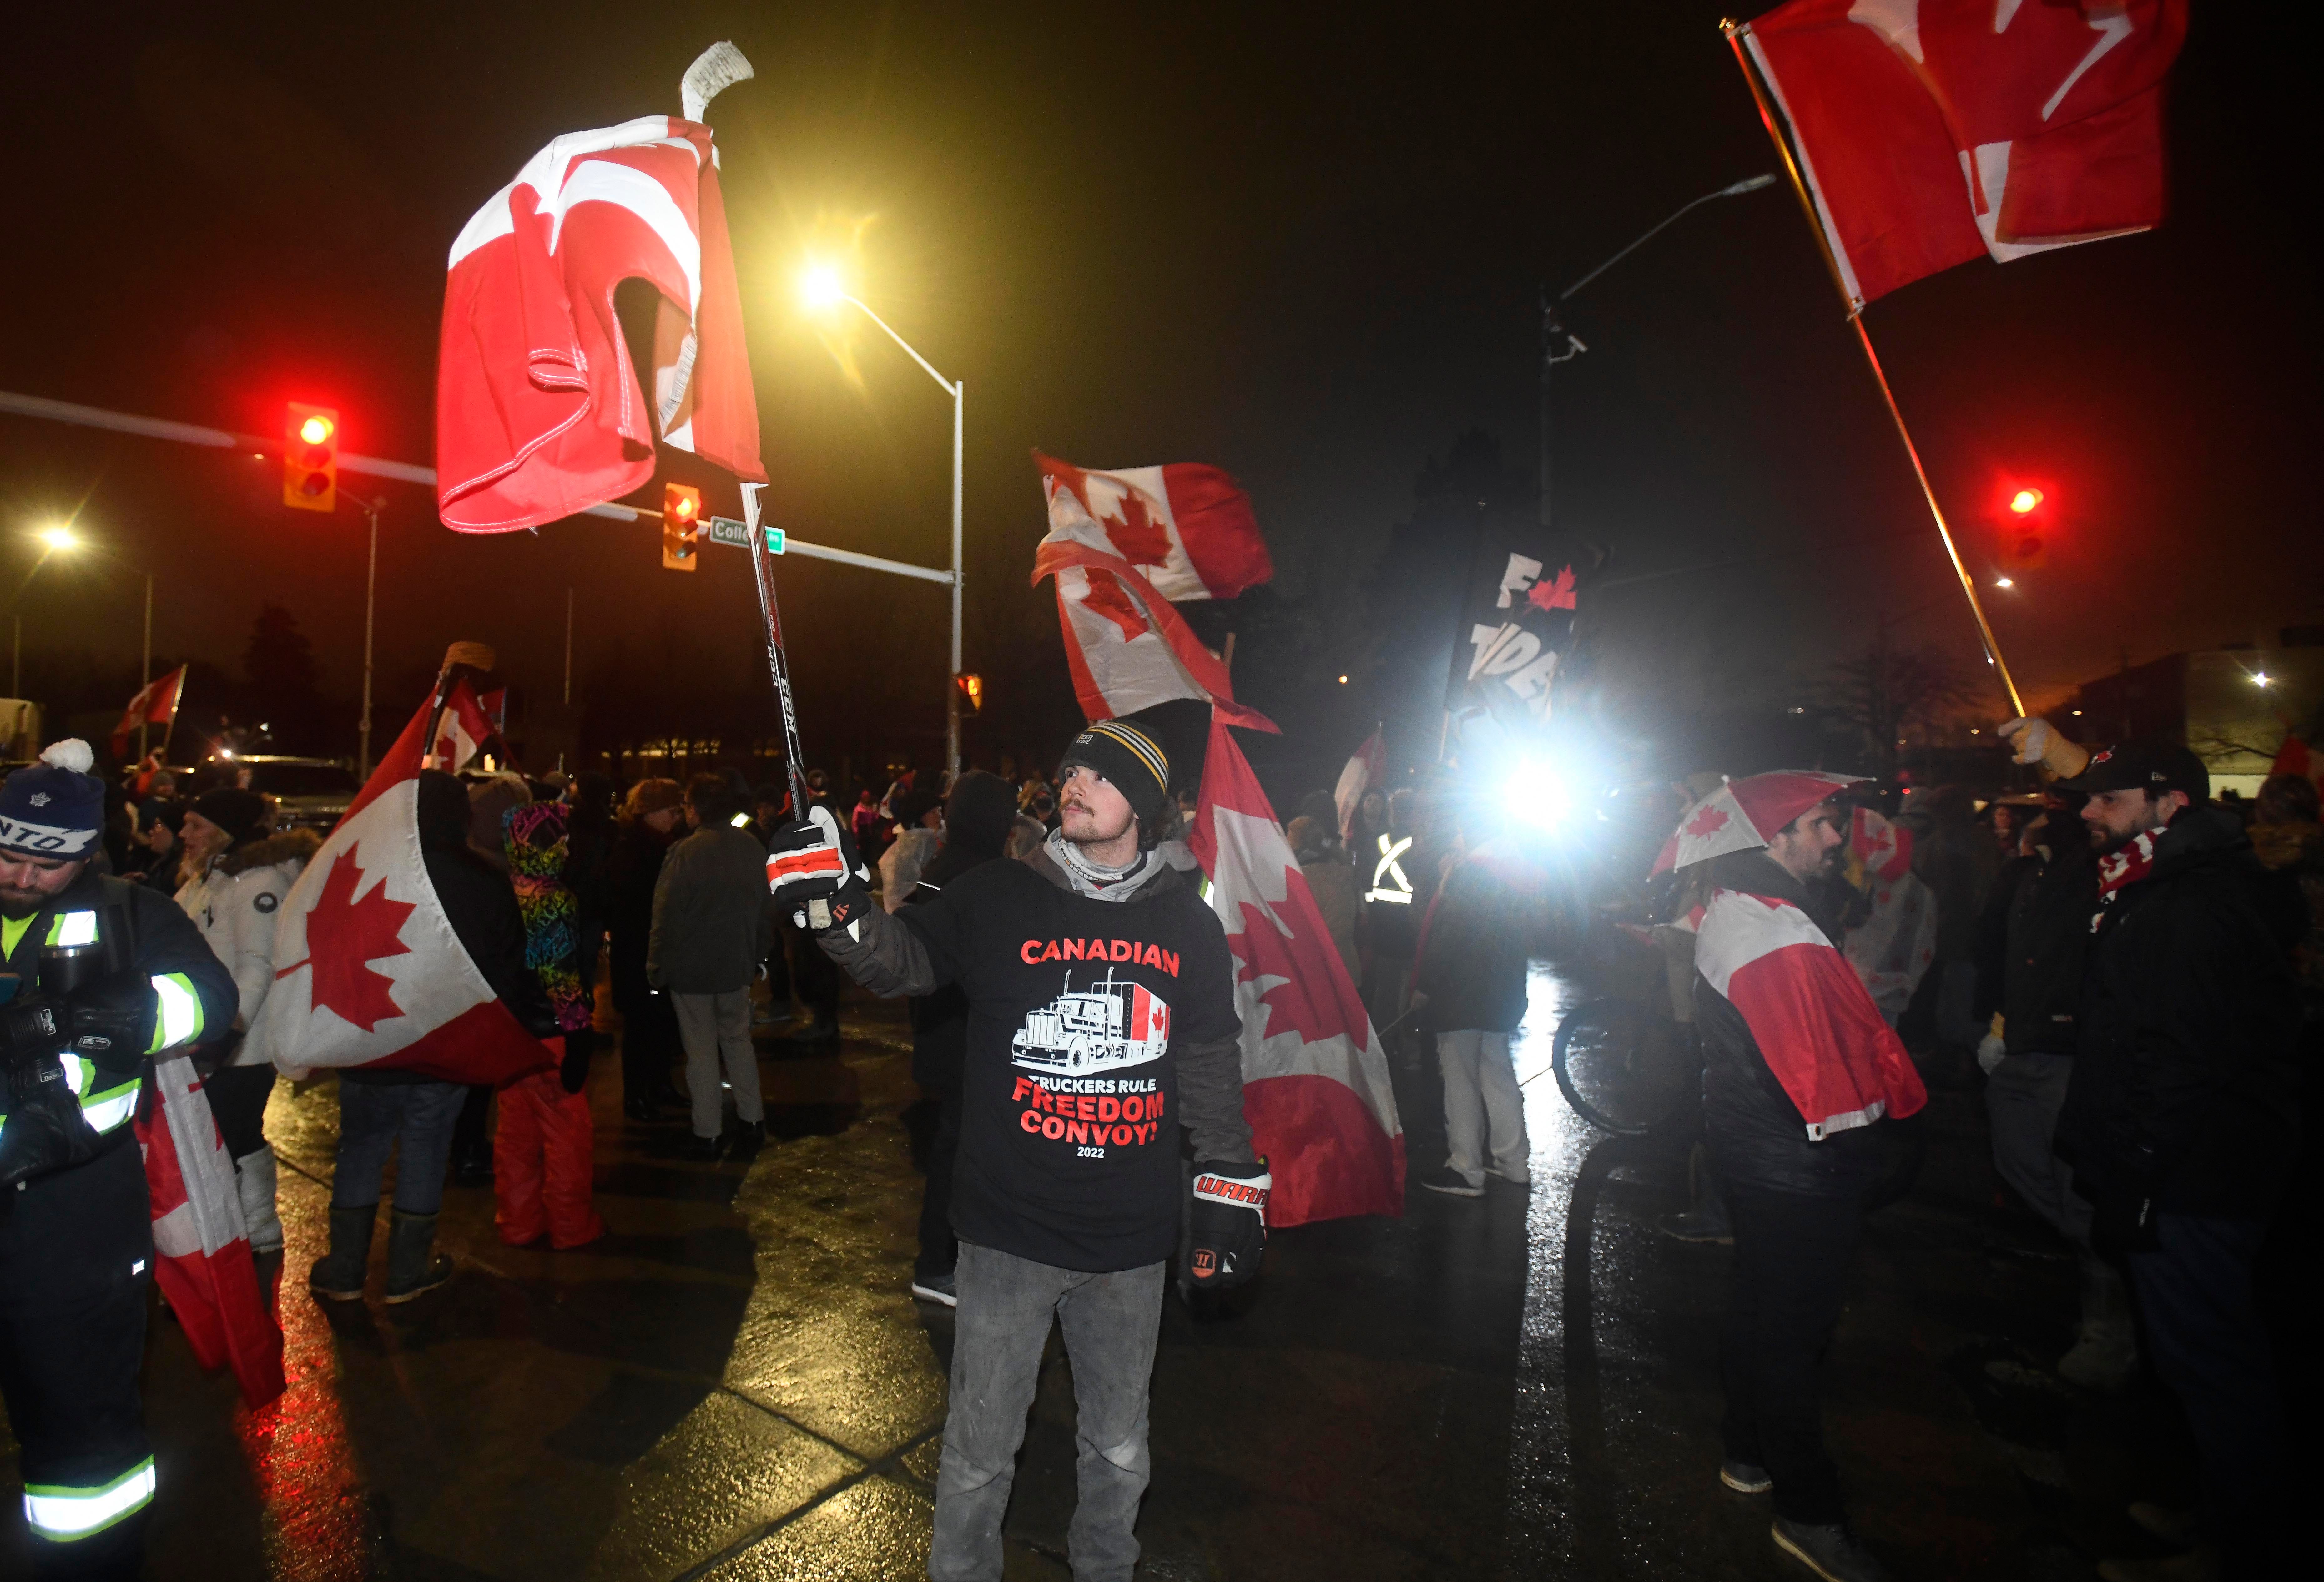 Protesters waves flags in the street in Windsor, Canada on February 11, 2022 during a Canadian Freedom Convoy border blockade Friday night.